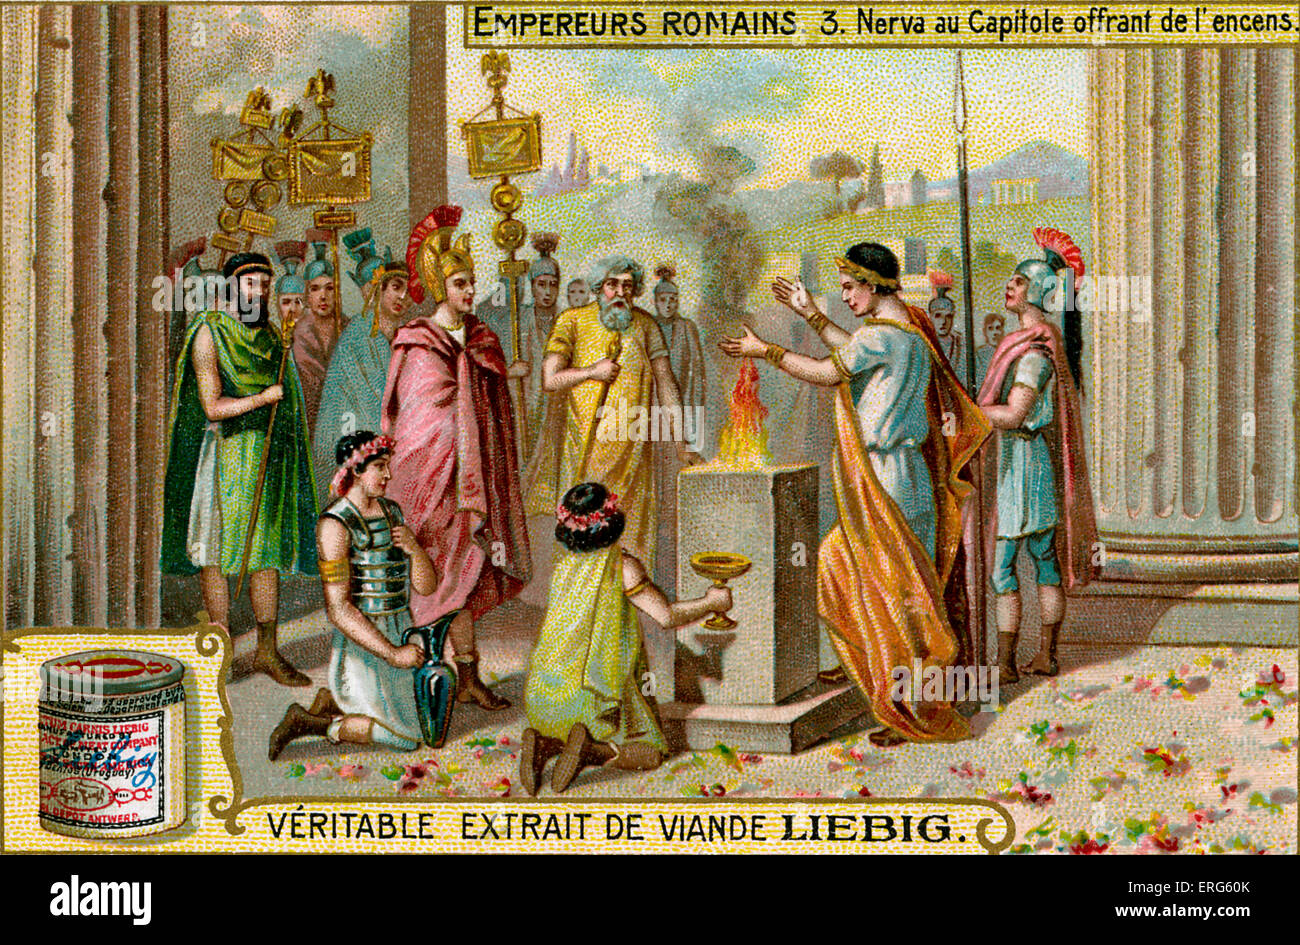 Marcus Cocceius Nerva - Roman Emperor from 96 to 98 A.D. Illustration on Liebig meat extract collectible card, 1907. Vignette Stock Photo